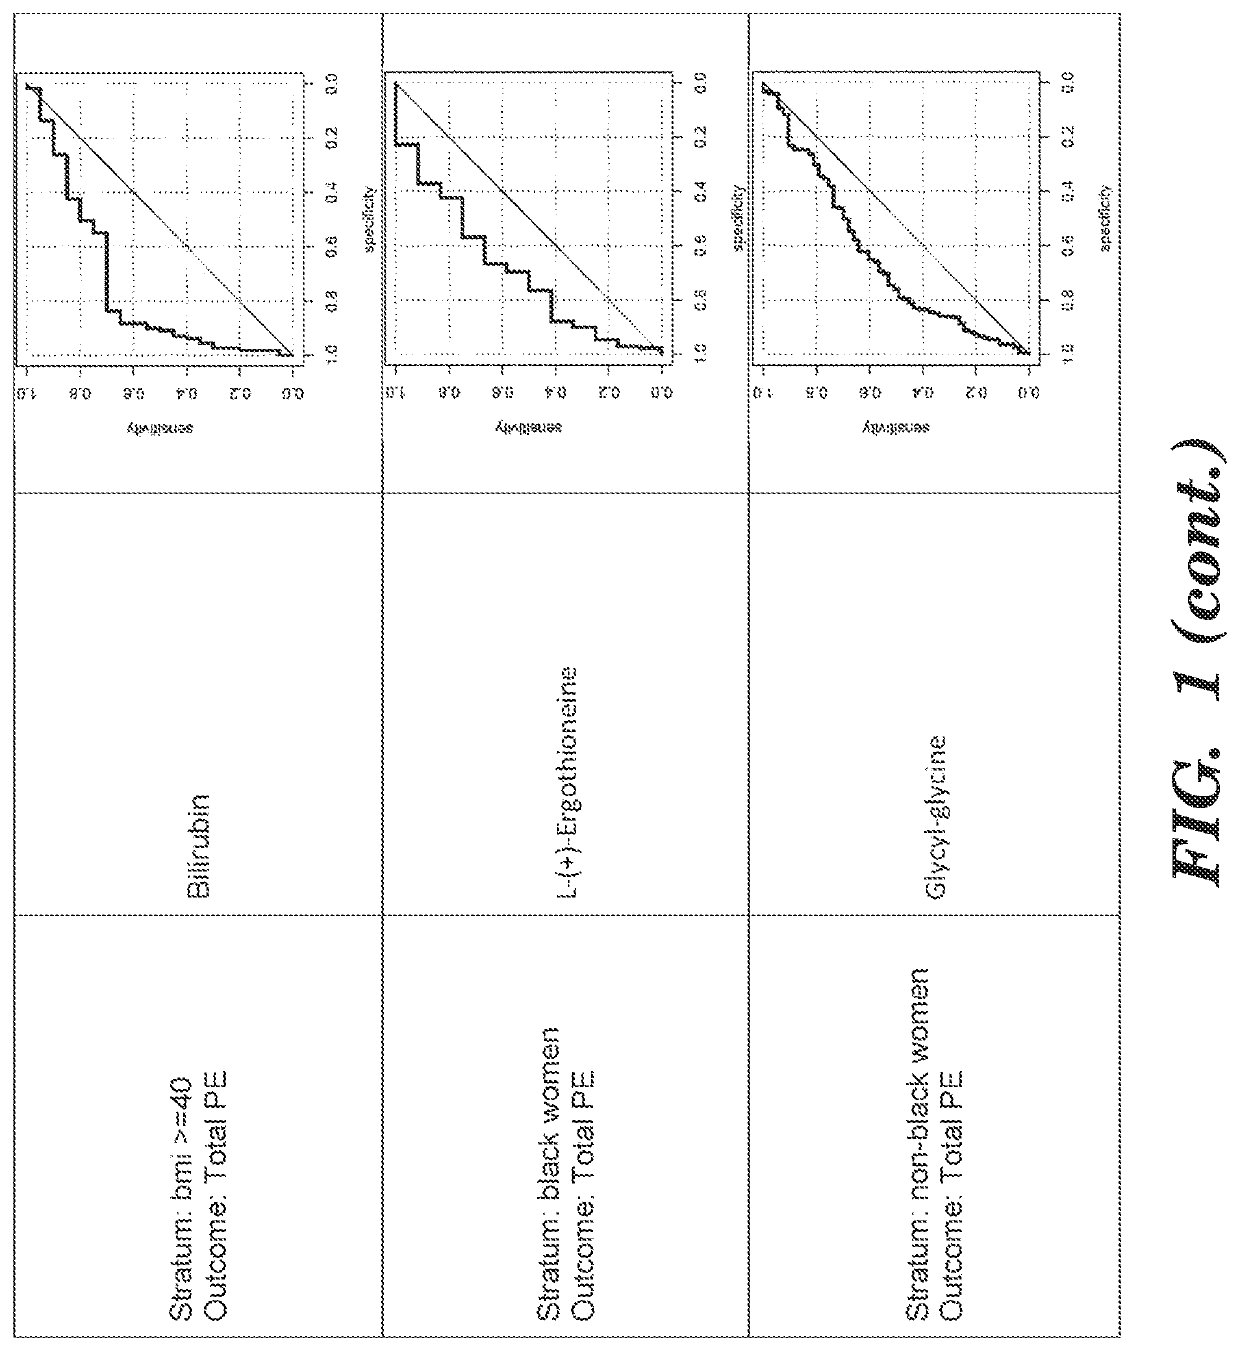 Detection of risk of pre-eclampsia in obese pregnant women